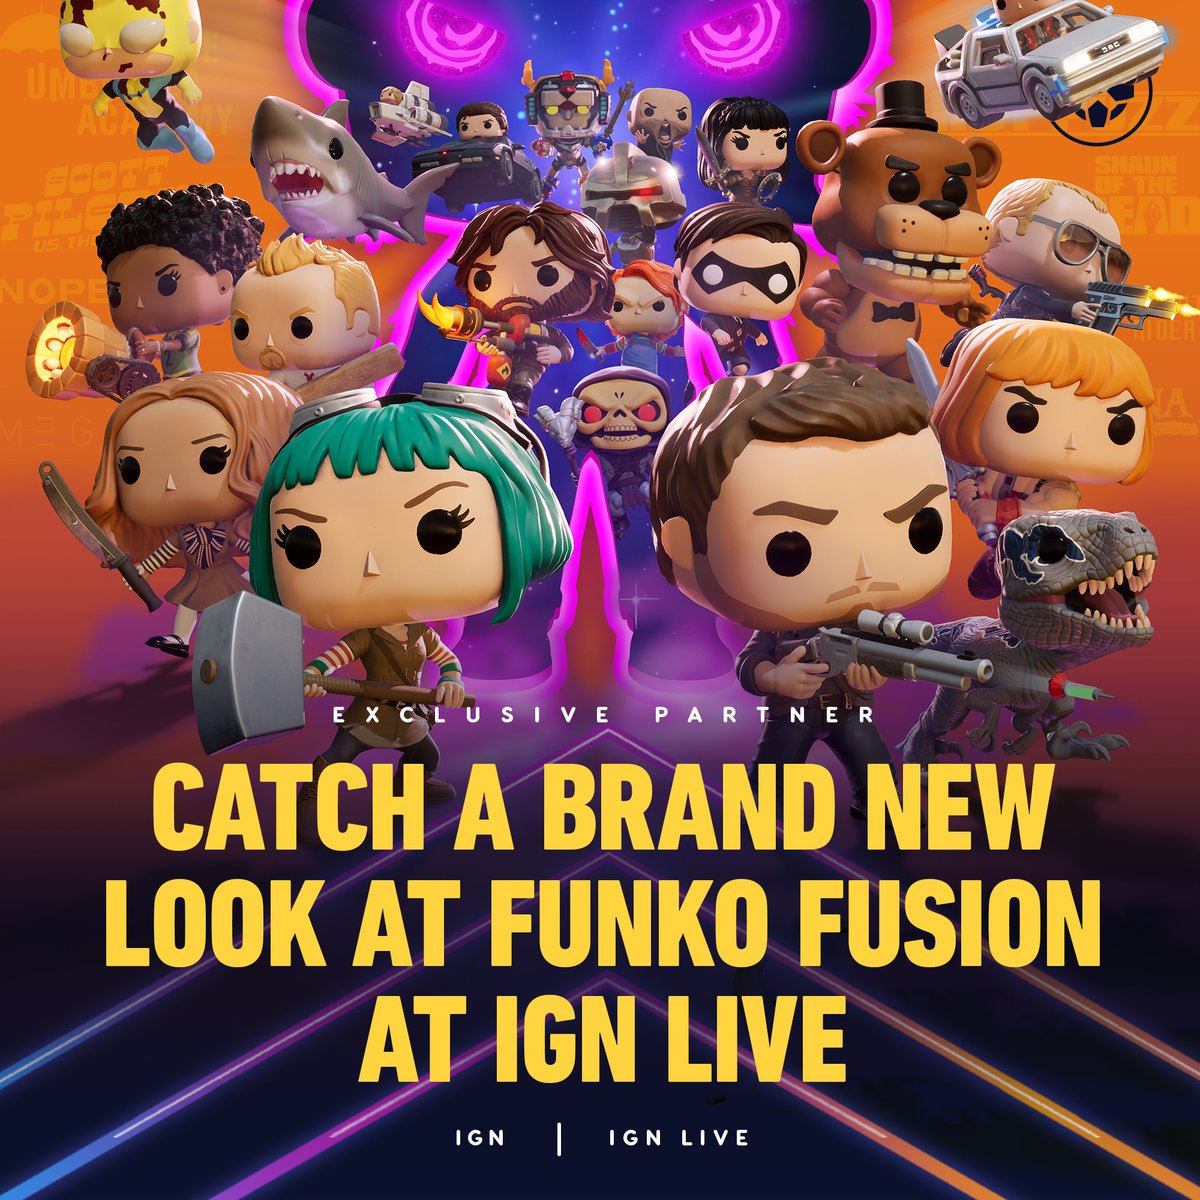 We're excited to show you more Funko Fusion gameplay soon during IGN Live! What are you hoping to see? Check out more info about the event online and in-person in LA from June 7-9: ign.com/live